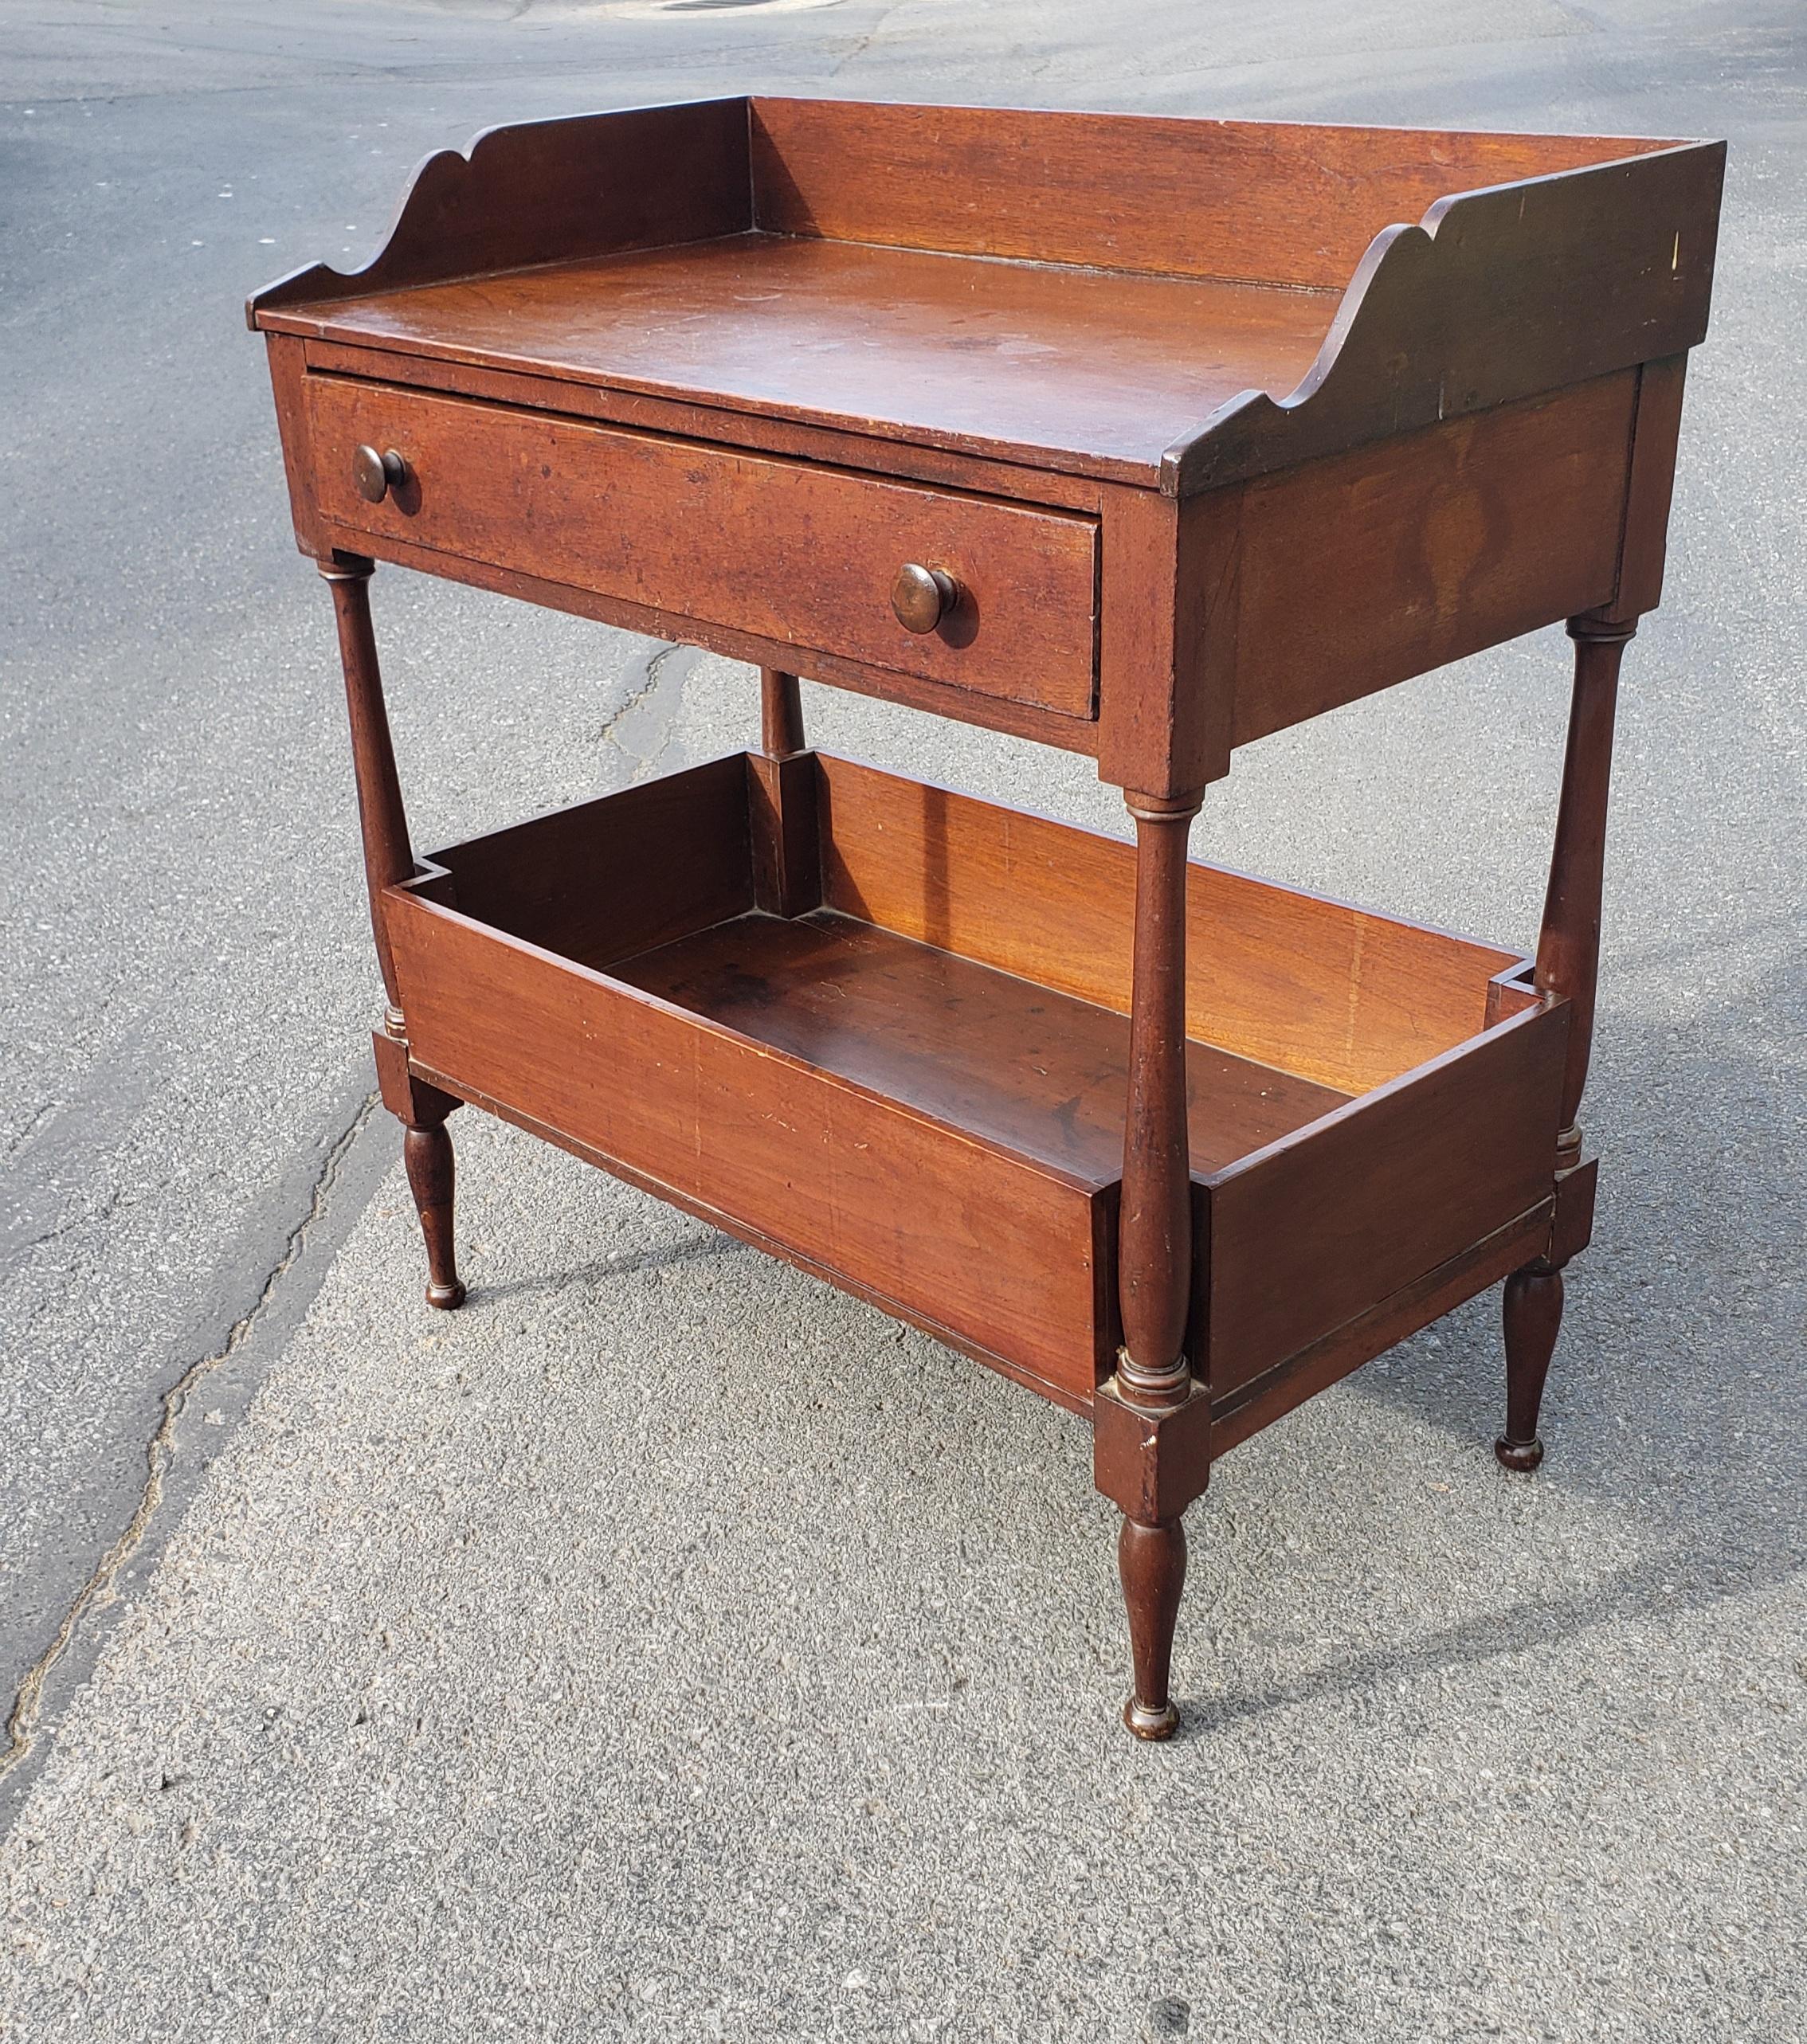 19th Century Walnut Tiered Washstand or Work Table with Drawer and Open Storage In Good Condition For Sale In Germantown, MD